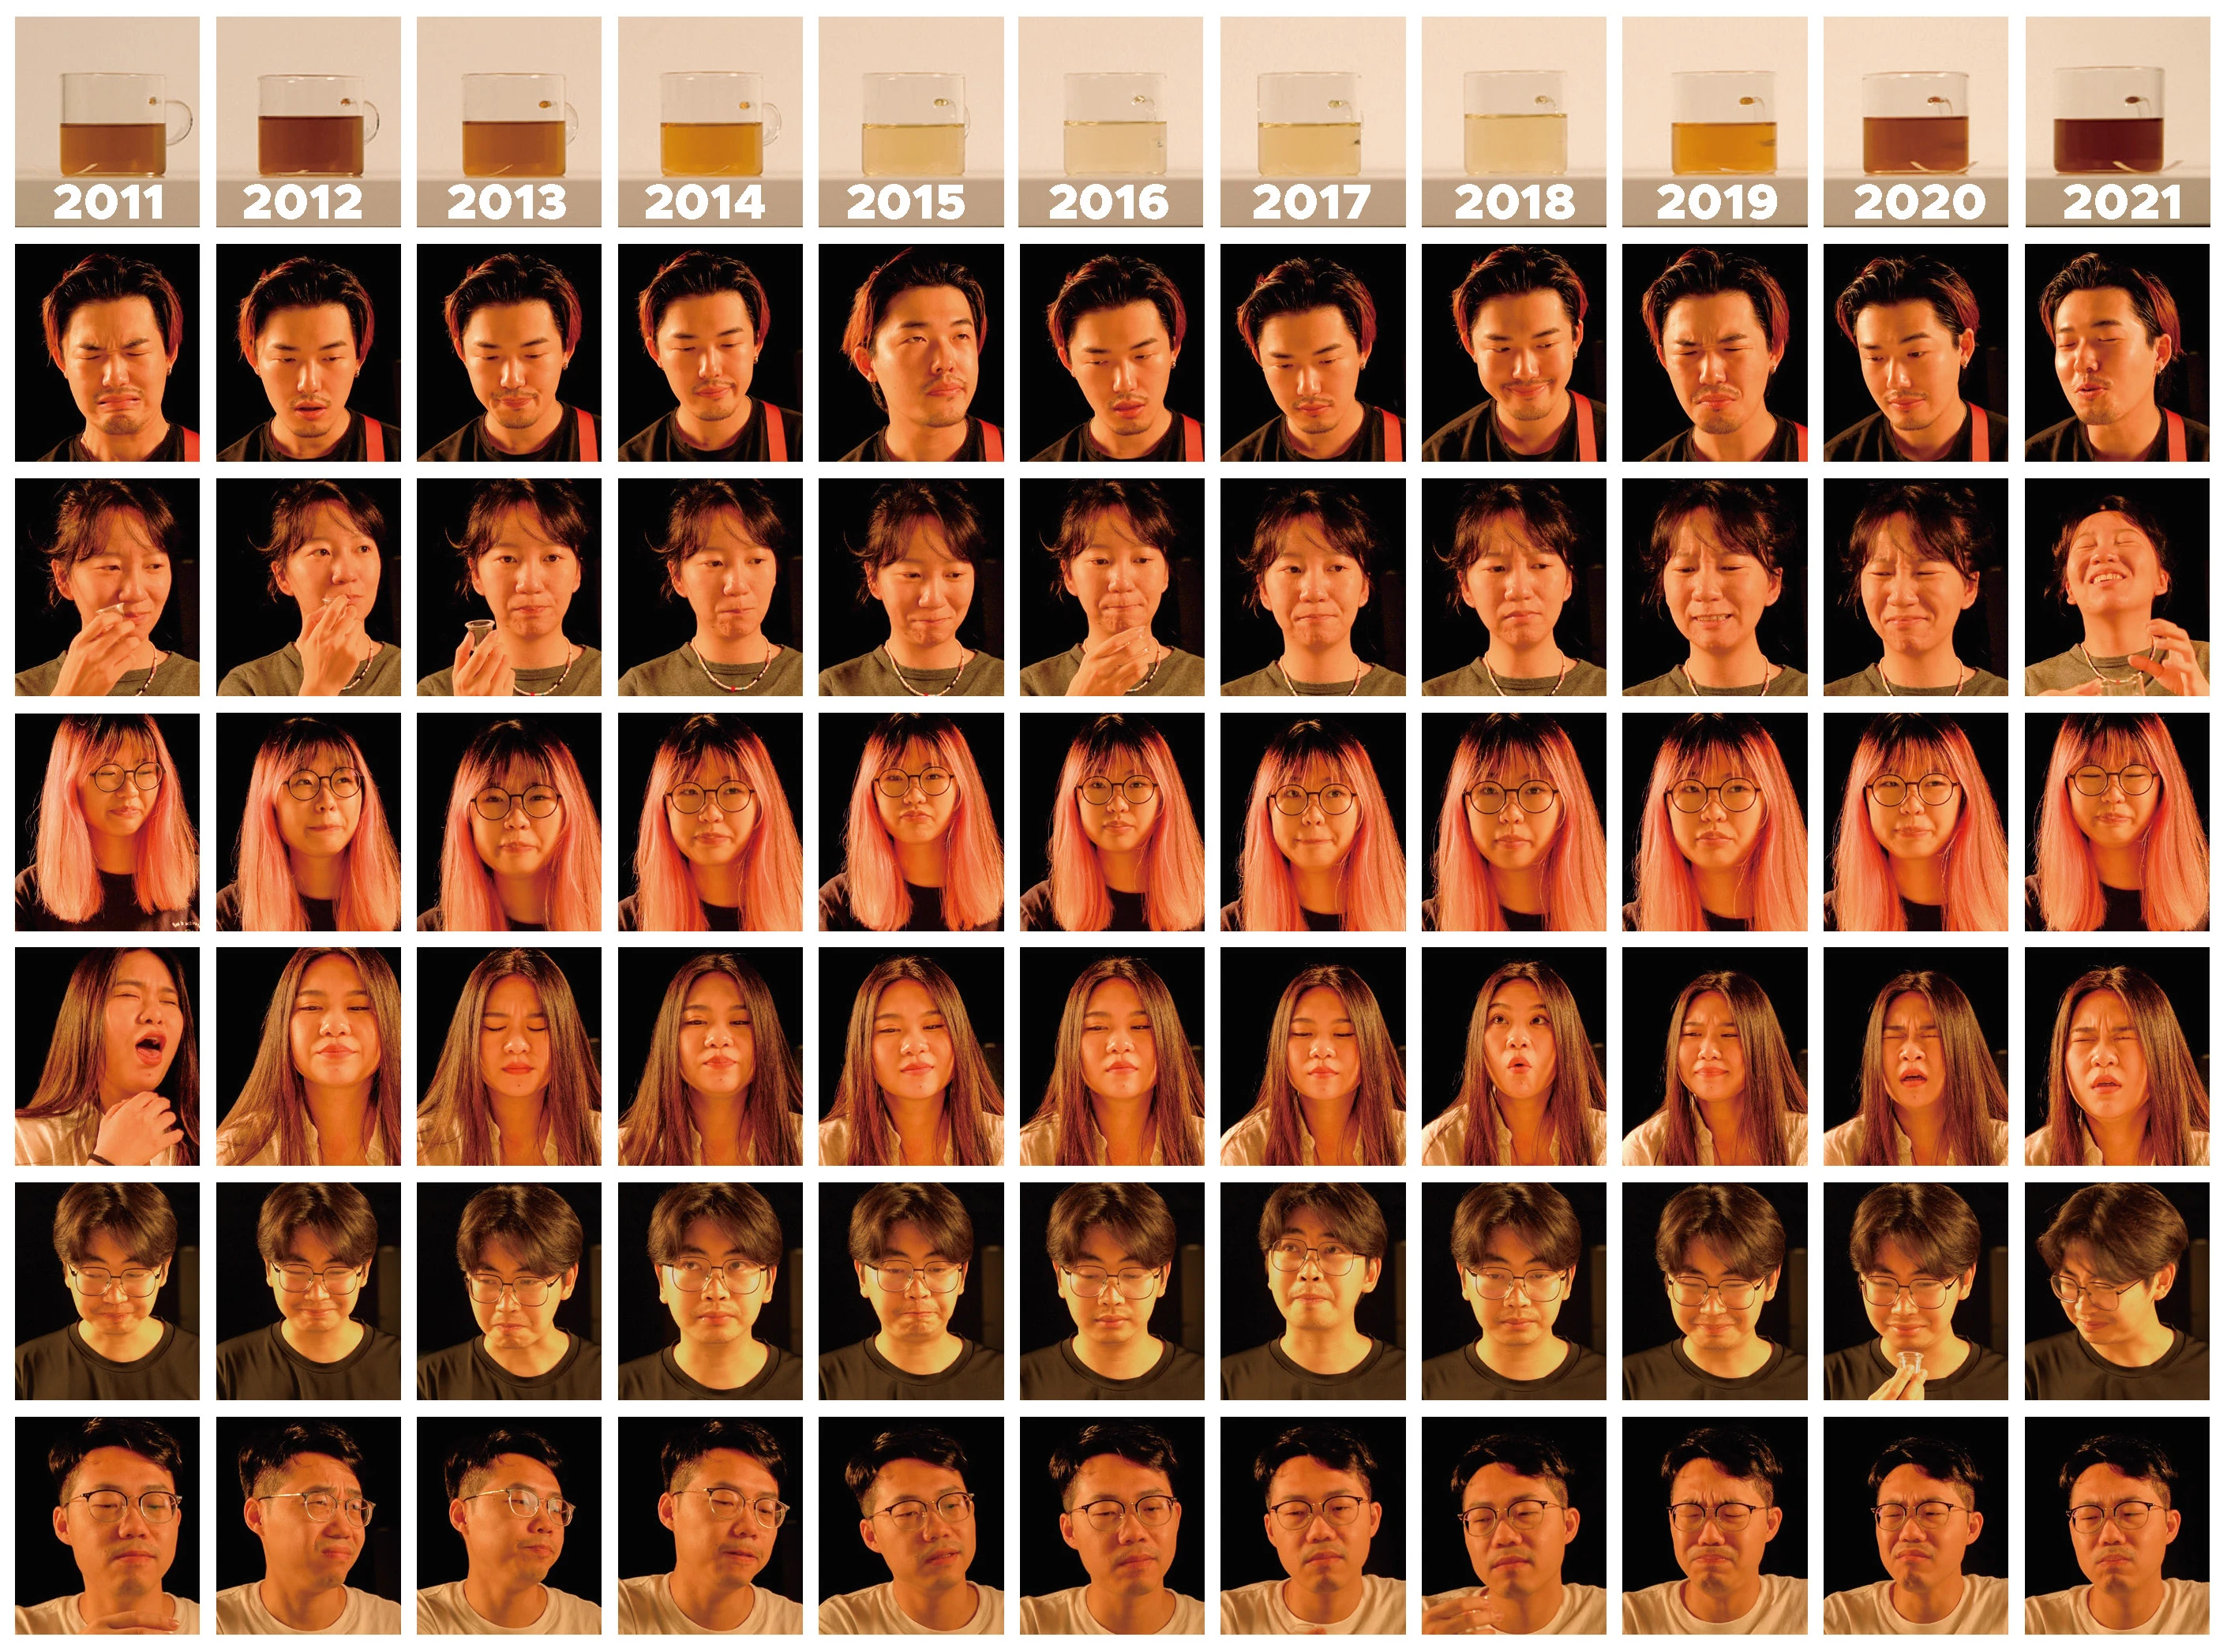 Mapping facial expressions in correlation with the bitterness of each year.